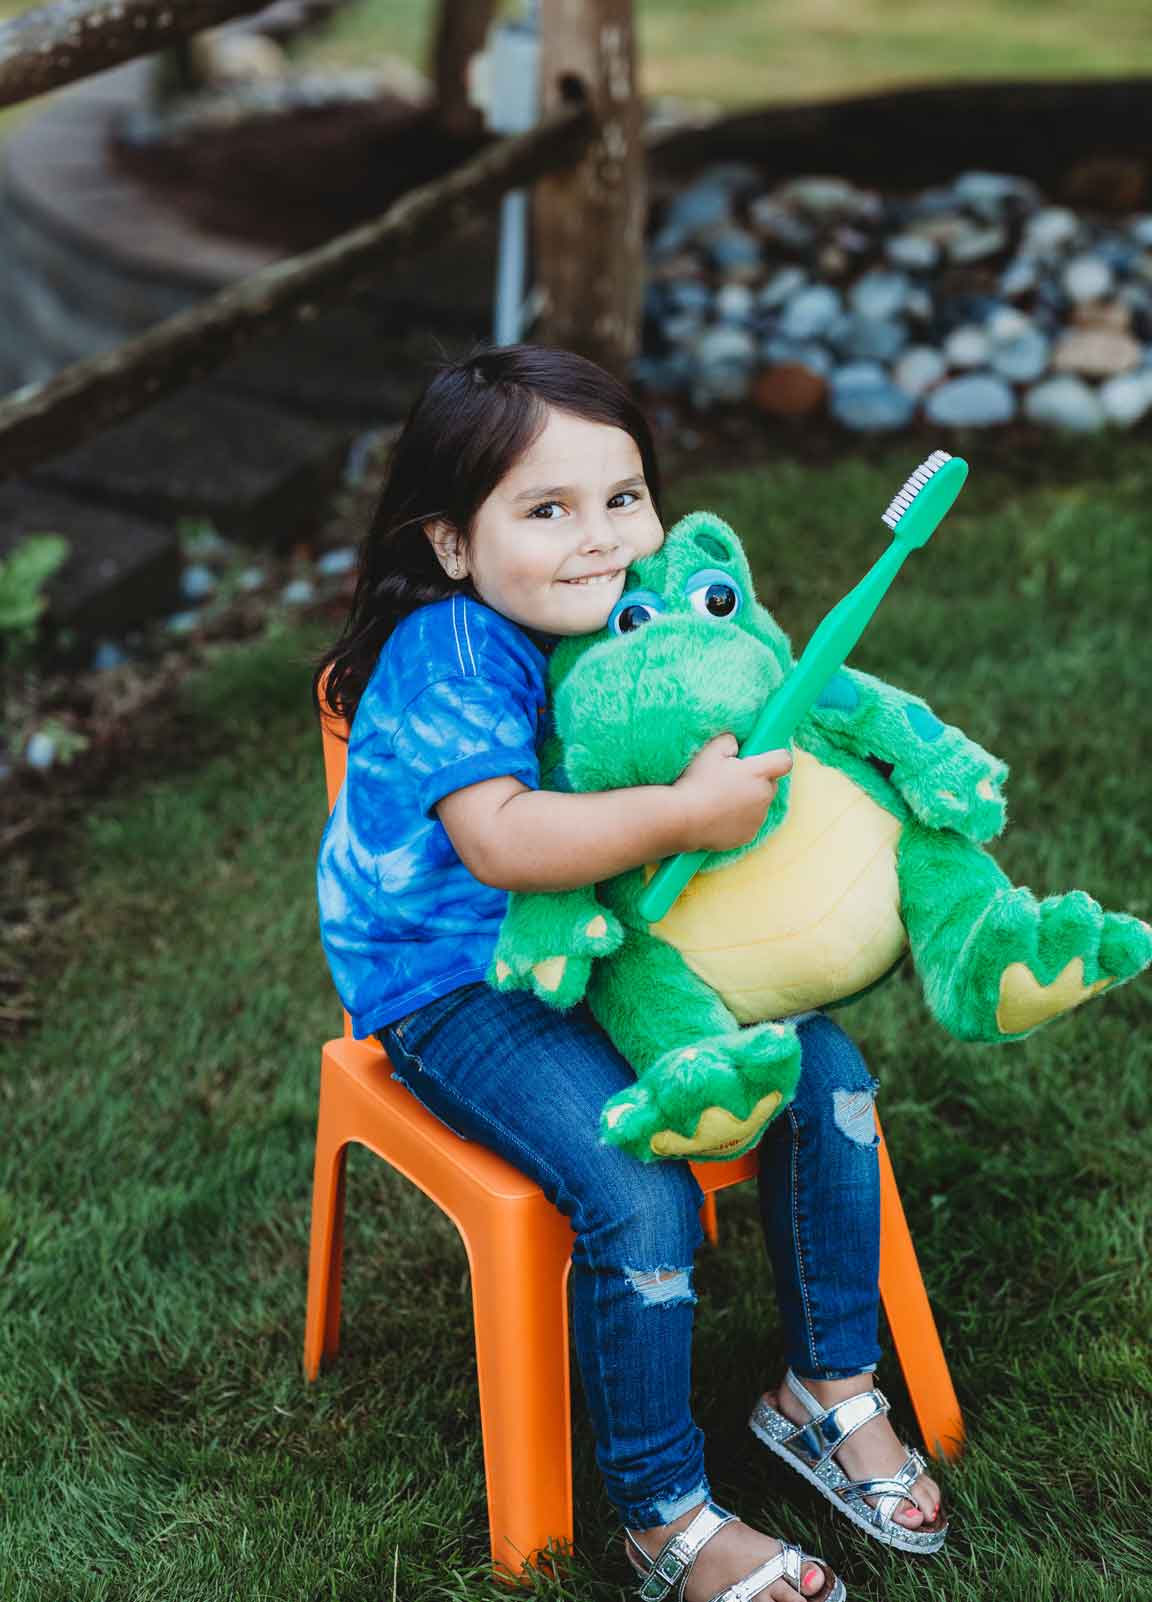 A girl in a tie-dye shirt, holding a large green toothbrush and hugging a plush dinosaur.